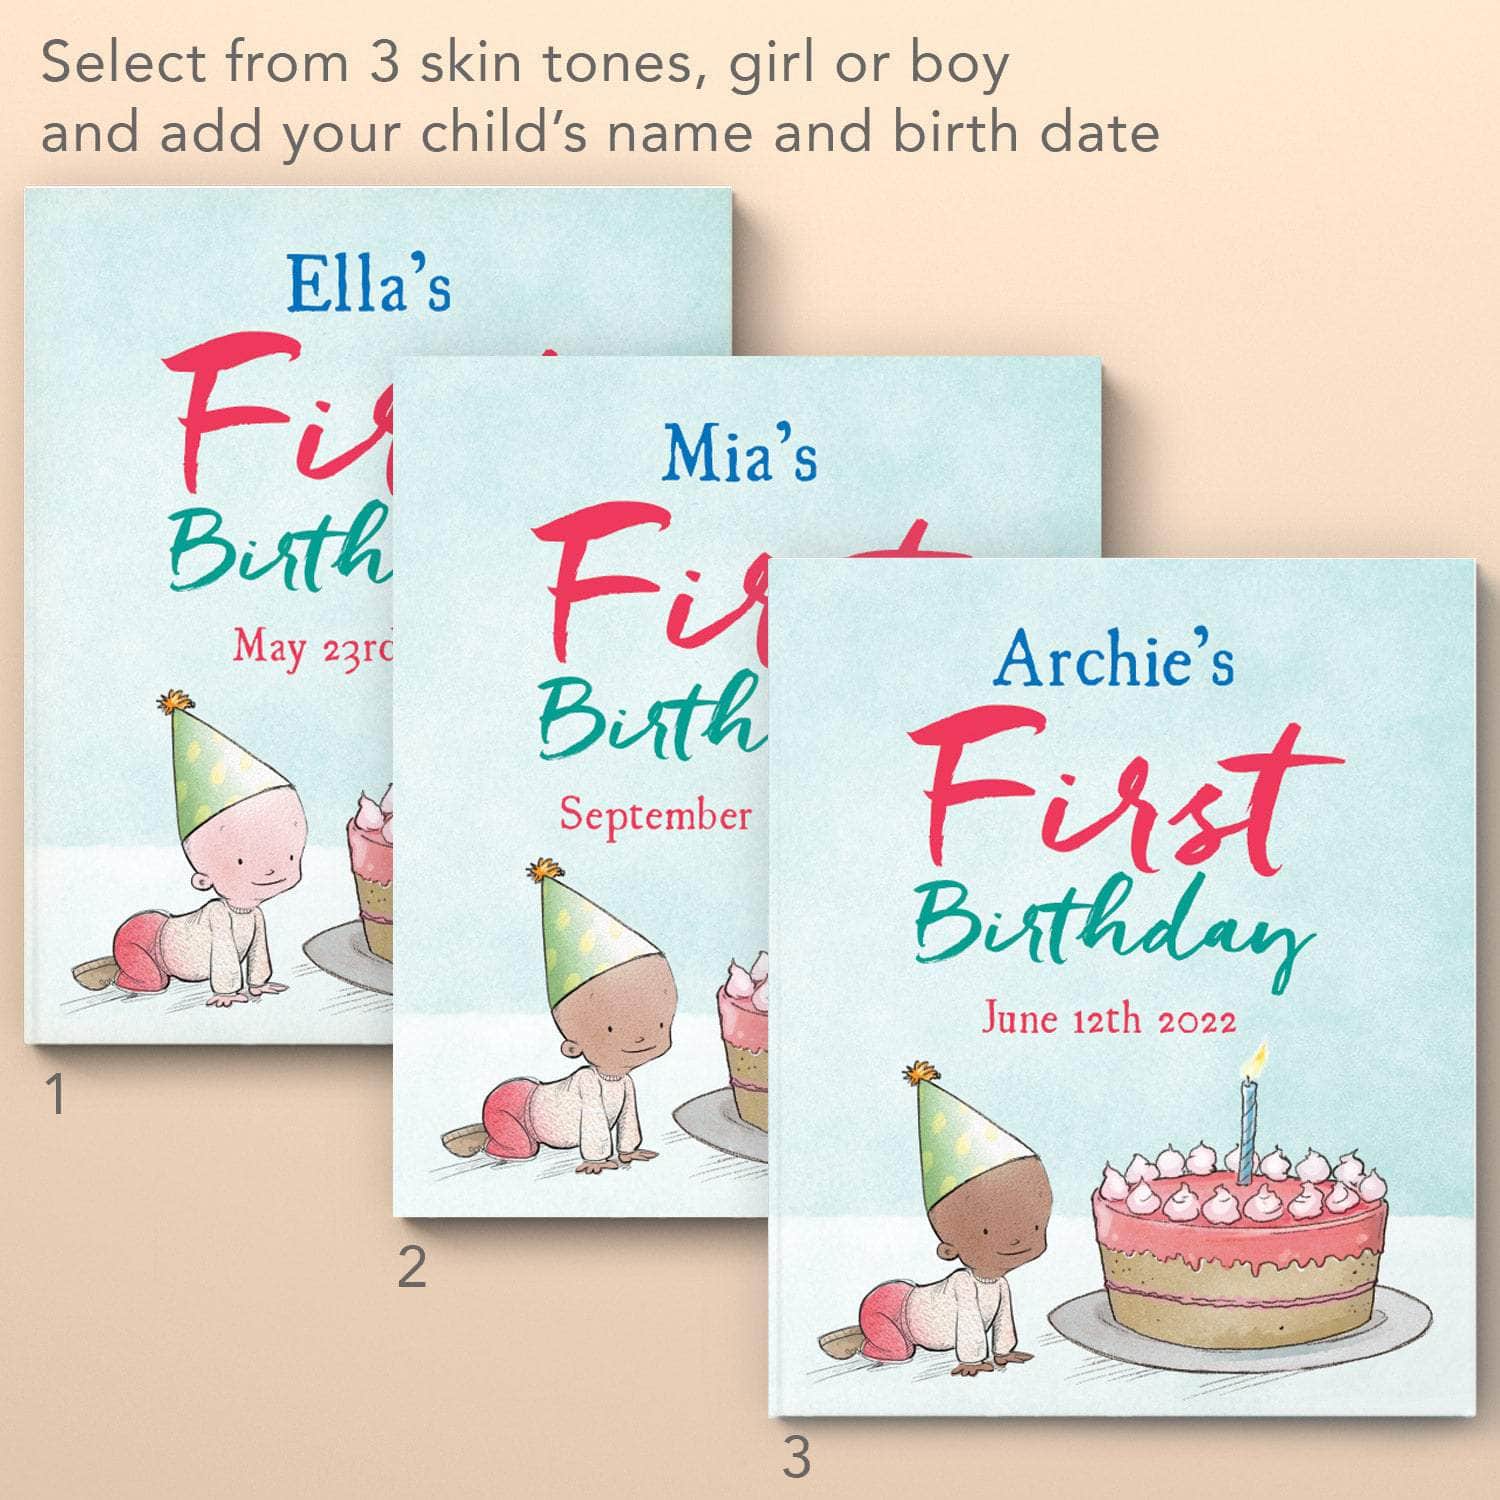 First Birthday for You, Personalize your baby's book